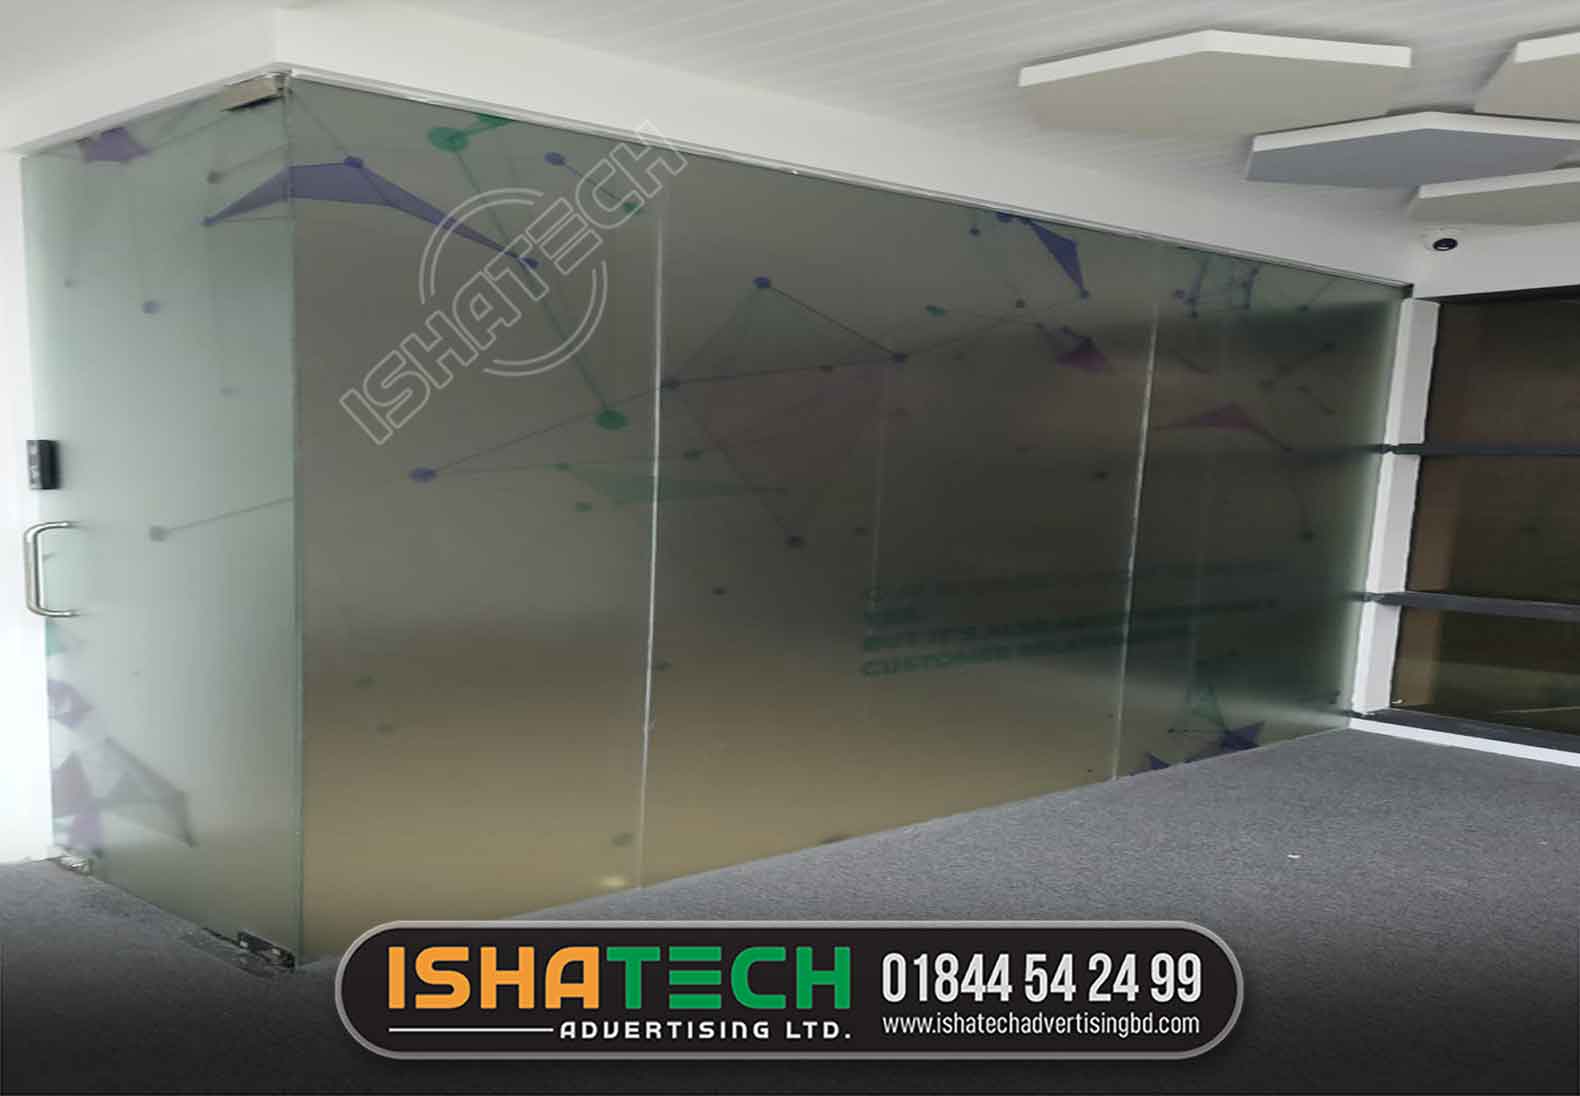 Top Glass Sticker Dealers in Bangalore, Shop For Wholesale glass stickers, For Office Rooms,